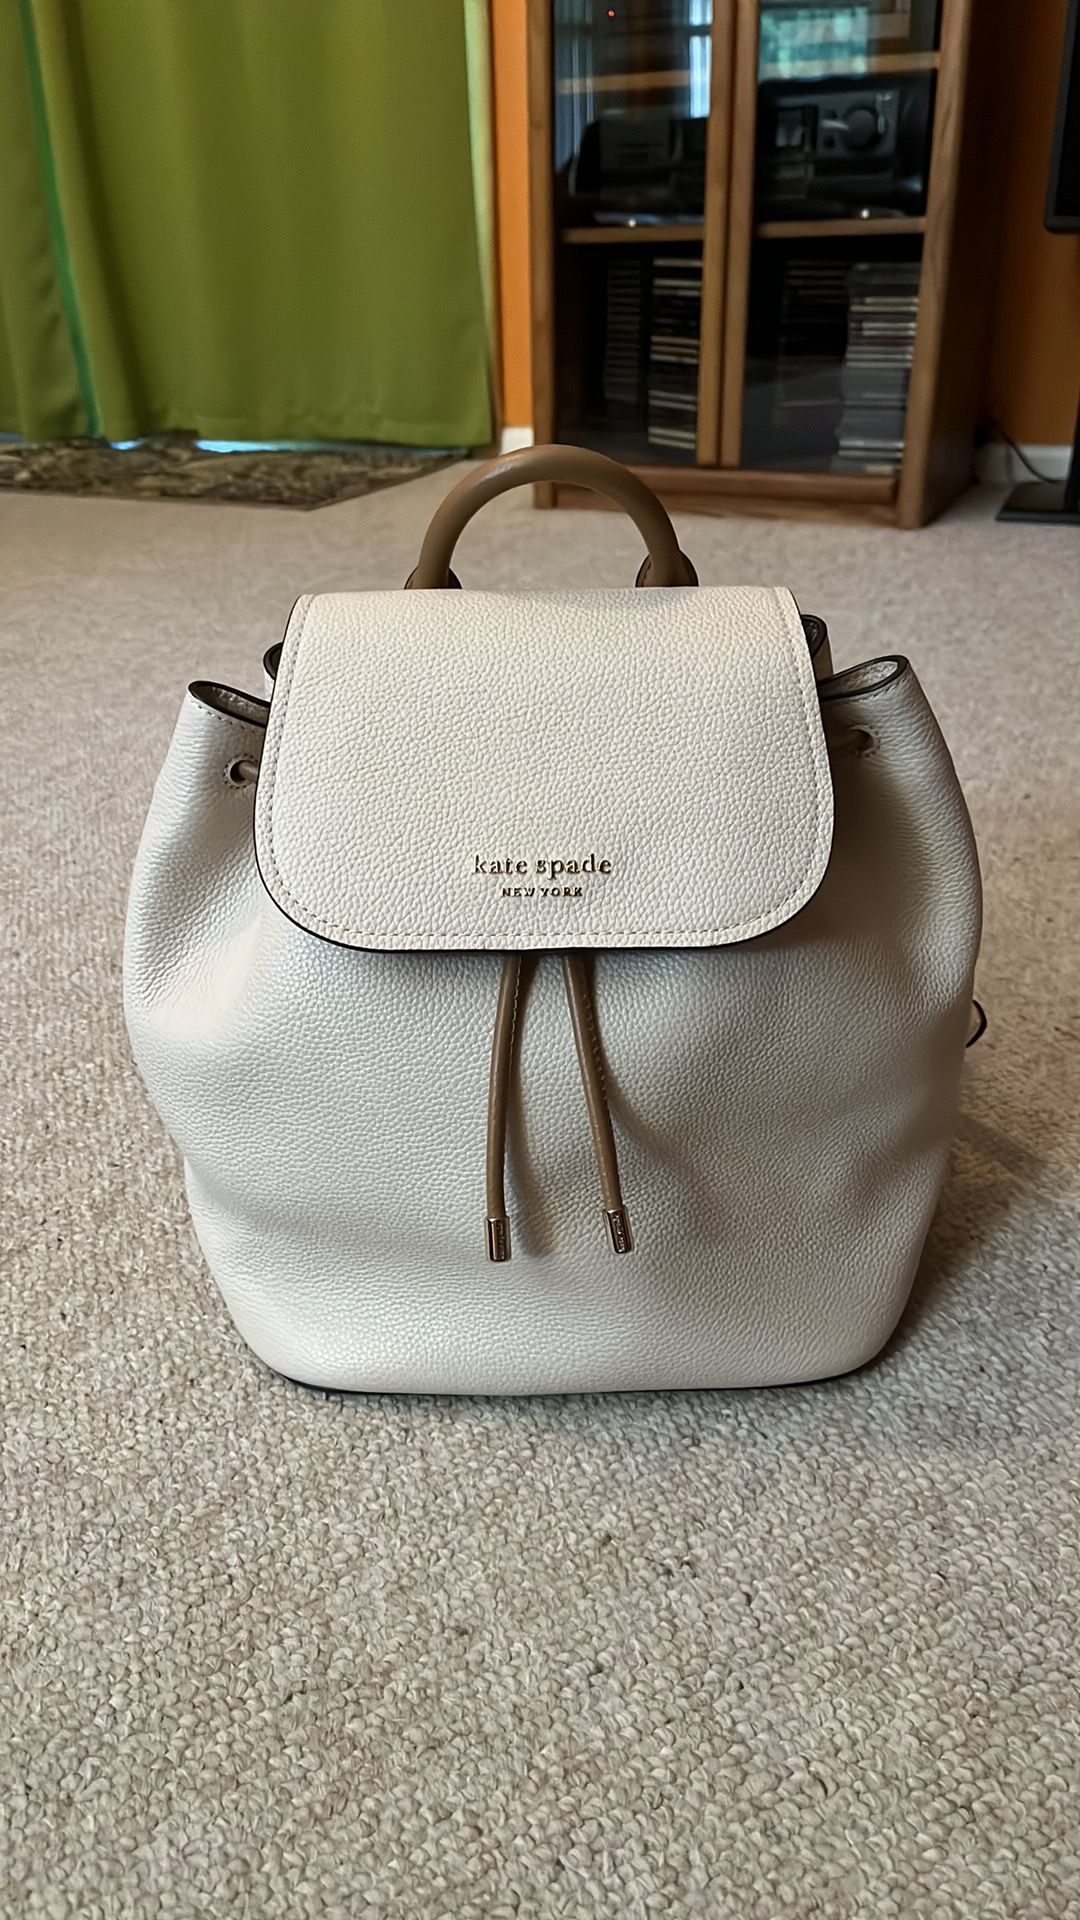 Kate Spade leather backpack